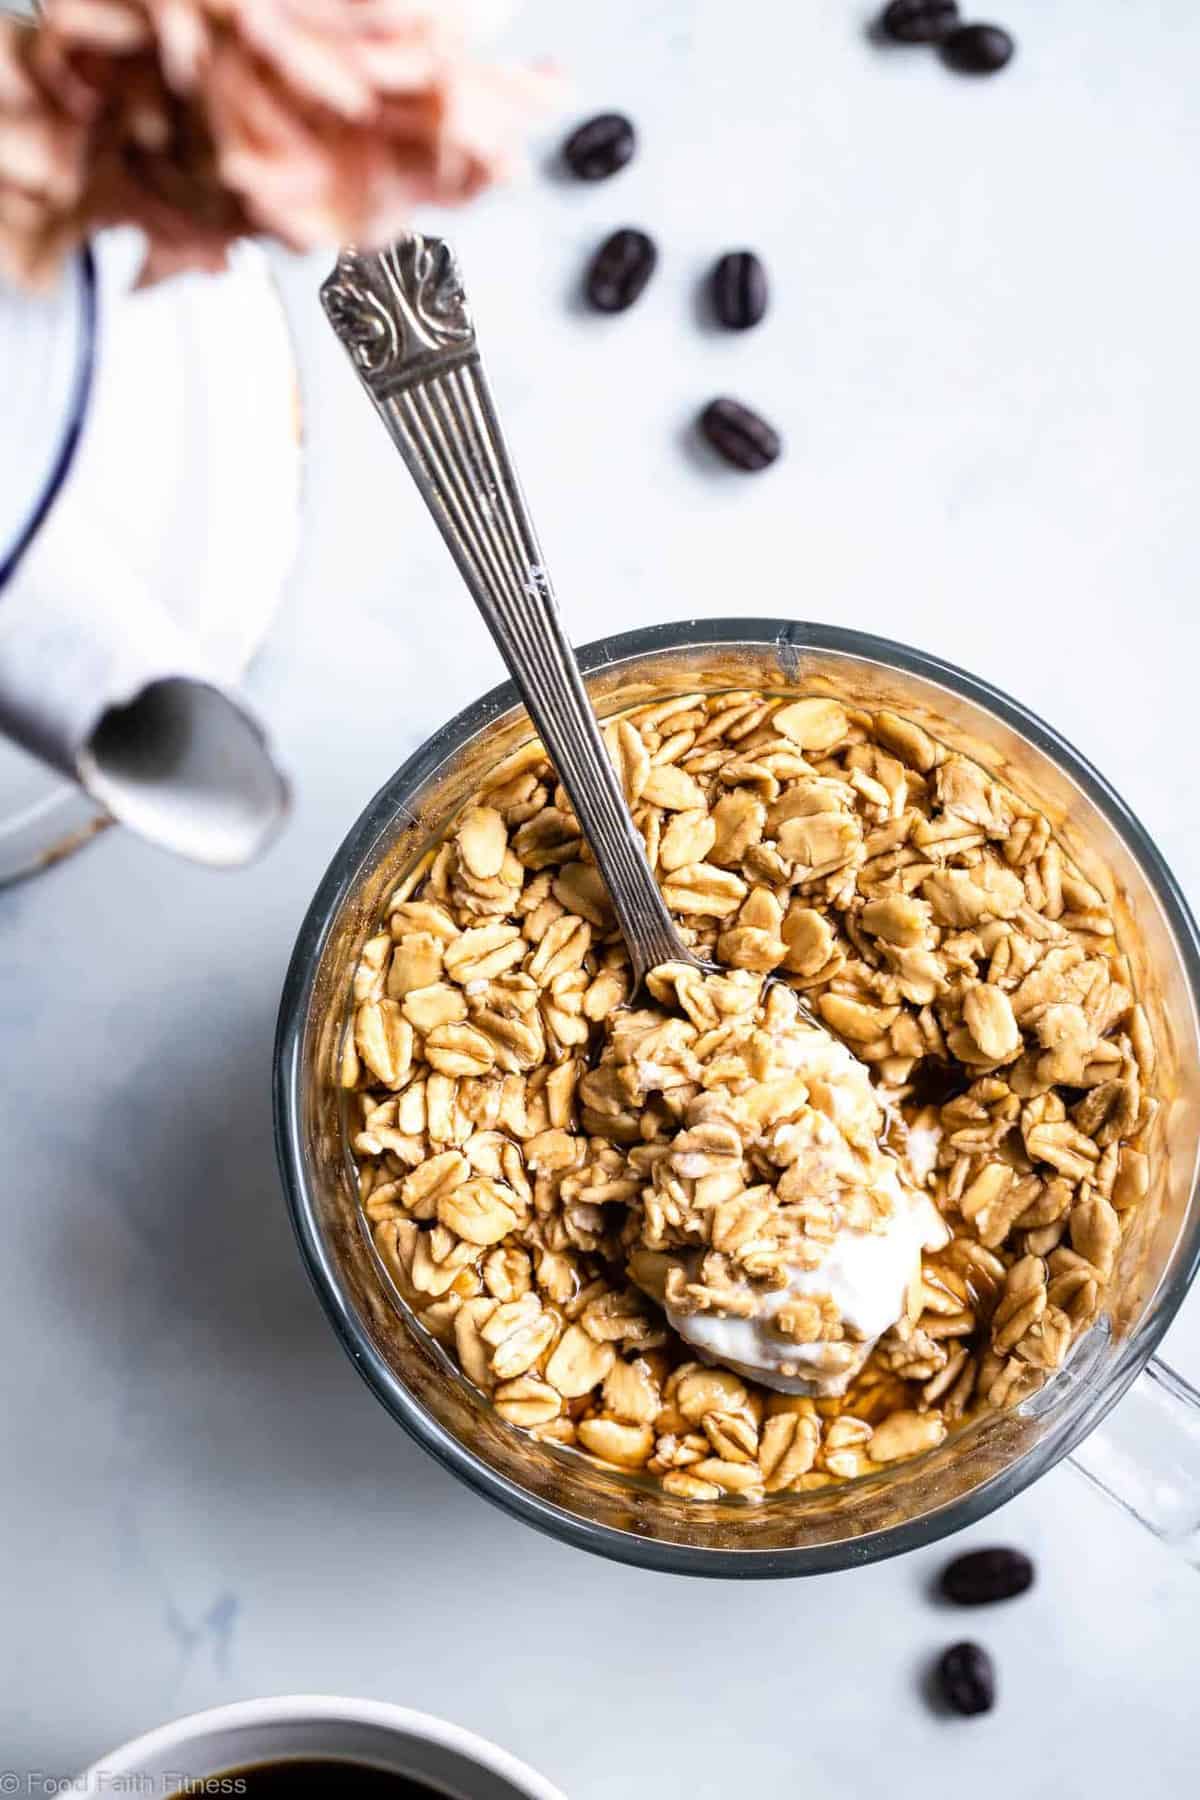 Vanilla Latte Overnight Oats - These gluten free overnight oats with Greek yogurt are a simple, 5 ingredient and protein packed way to start your day! Make them ahead for easy mornings! | #Foodfaithfitness | #glutenfree #healthy #breakfast #Greekyogurt #overnightoats